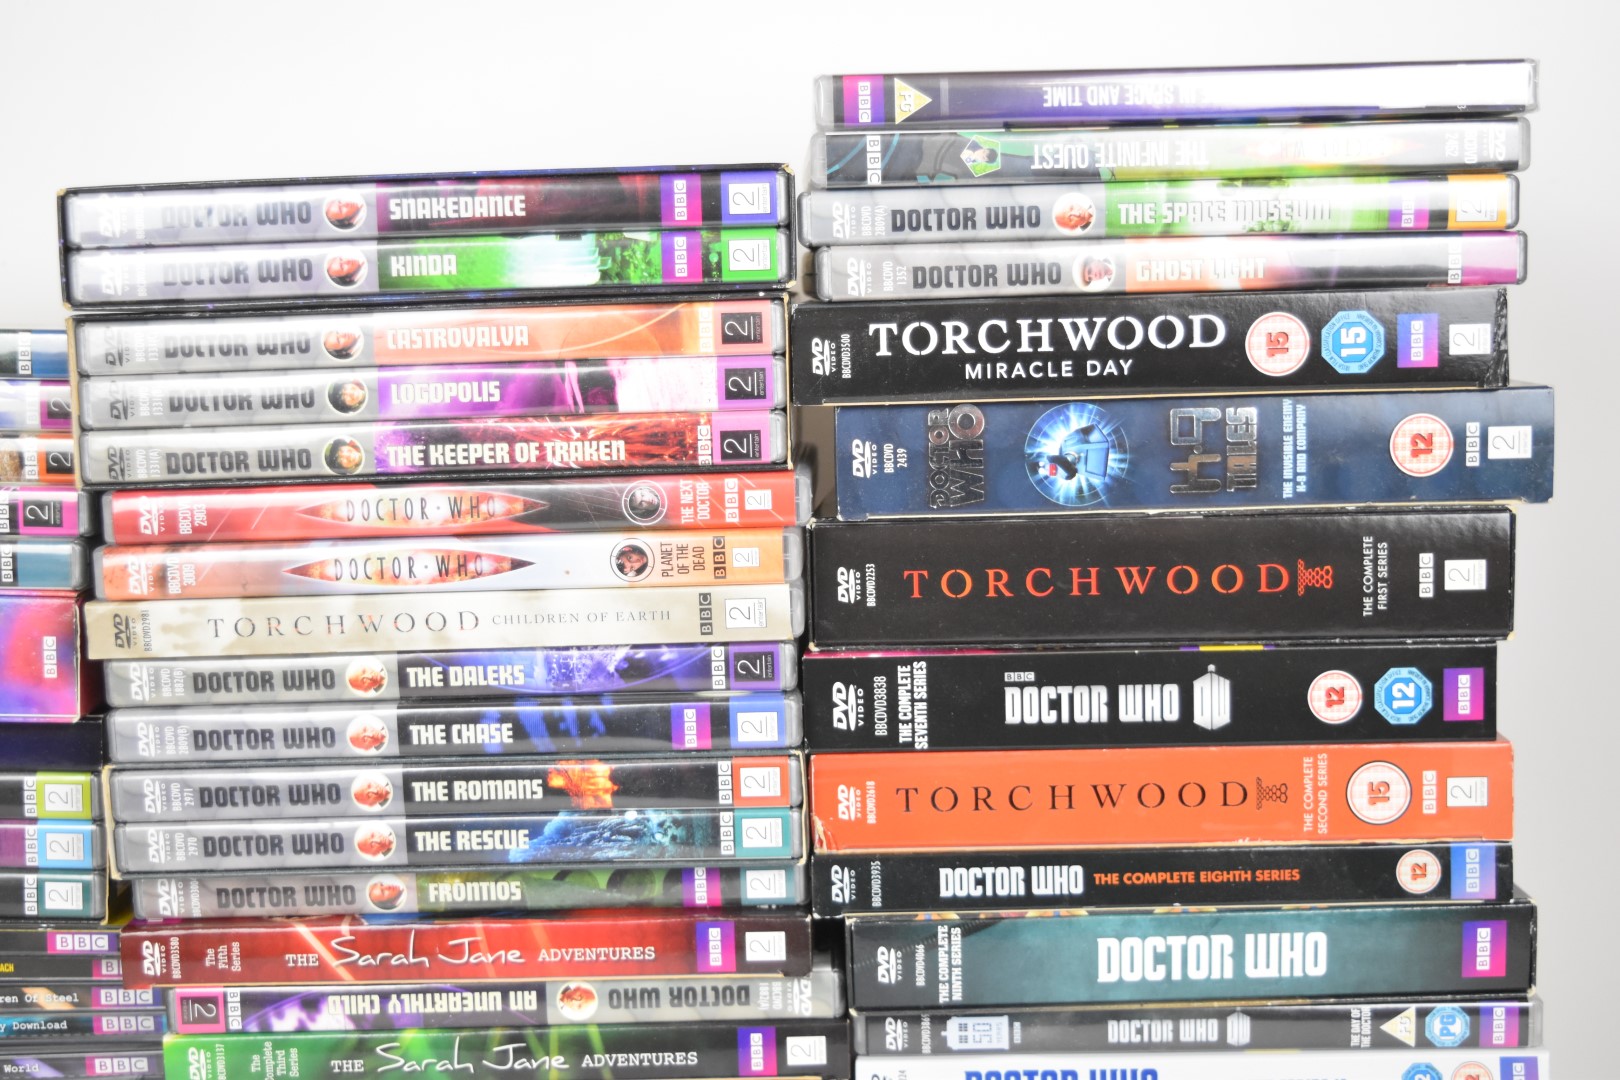 Forty-seven Doctor Who multi disc DVD boxed sets including TV specials and related titles, - Image 3 of 6